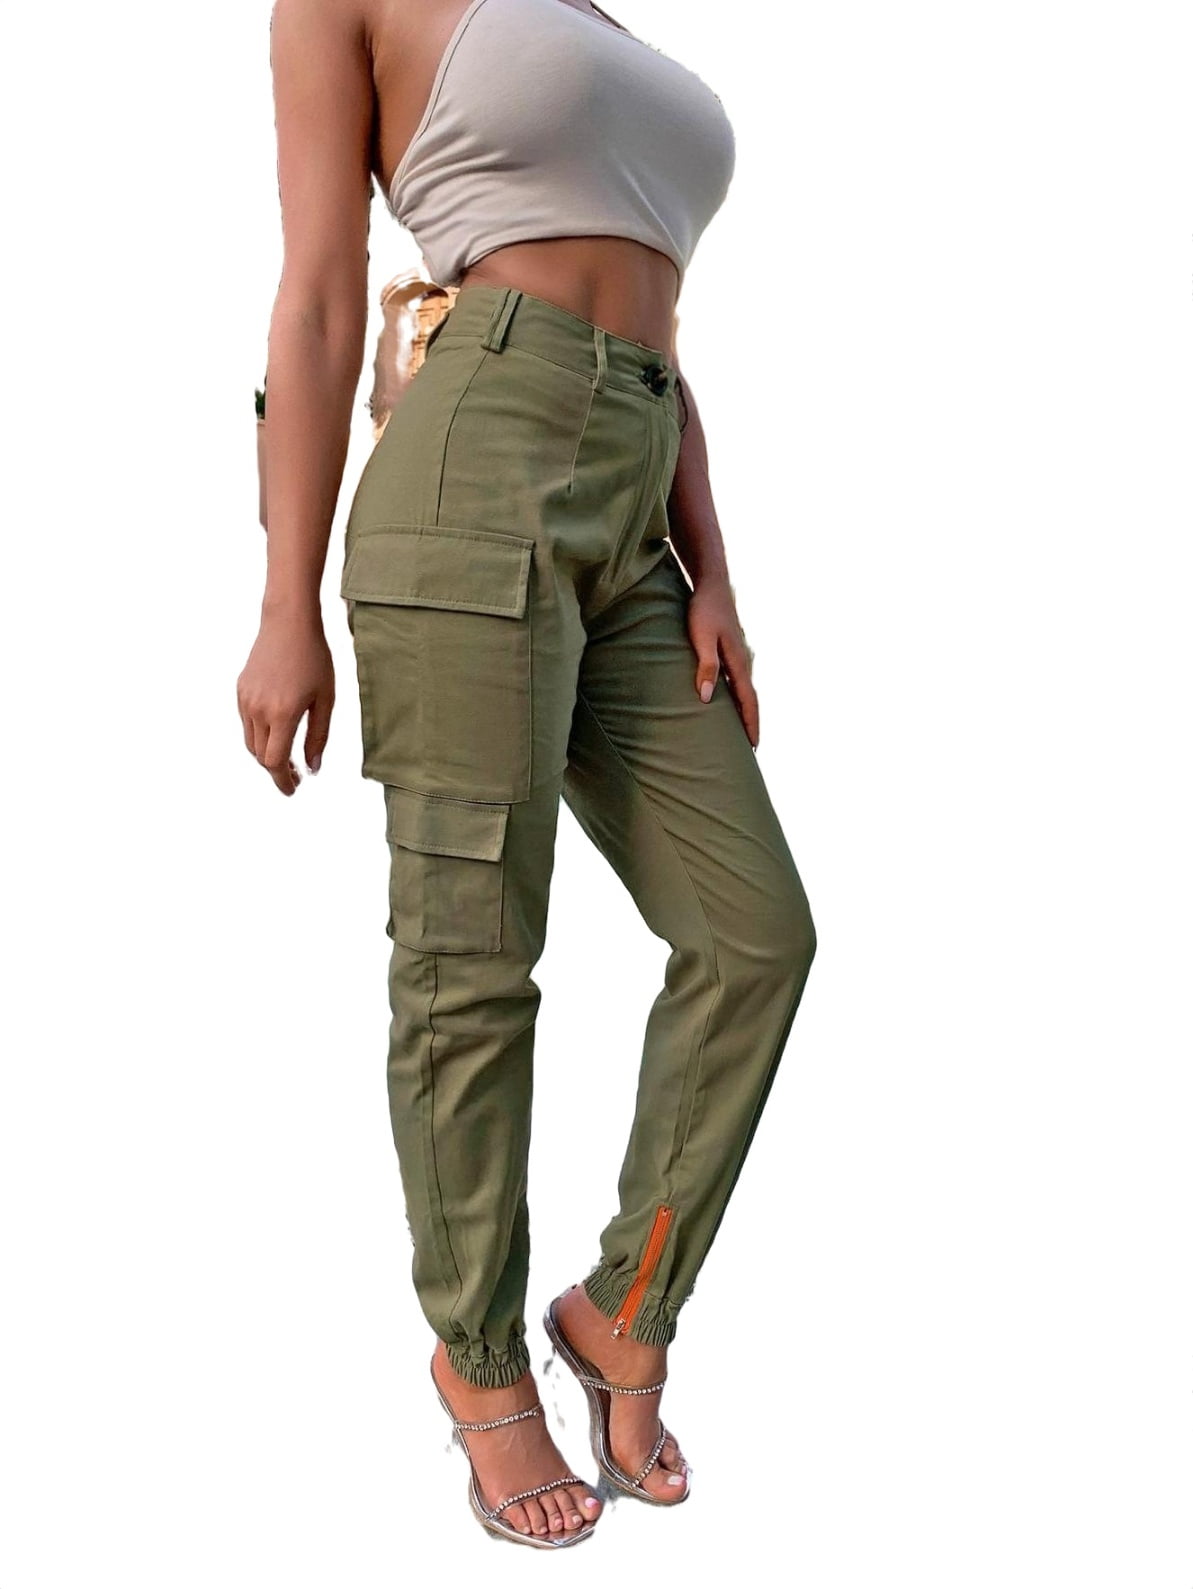 NanoEdge Women's High Waist Slim Fit Jogger Cargo Camo Pants for Women with  Matching Belt Size (26 Till 30) : Amazon.in: Clothing & Accessories